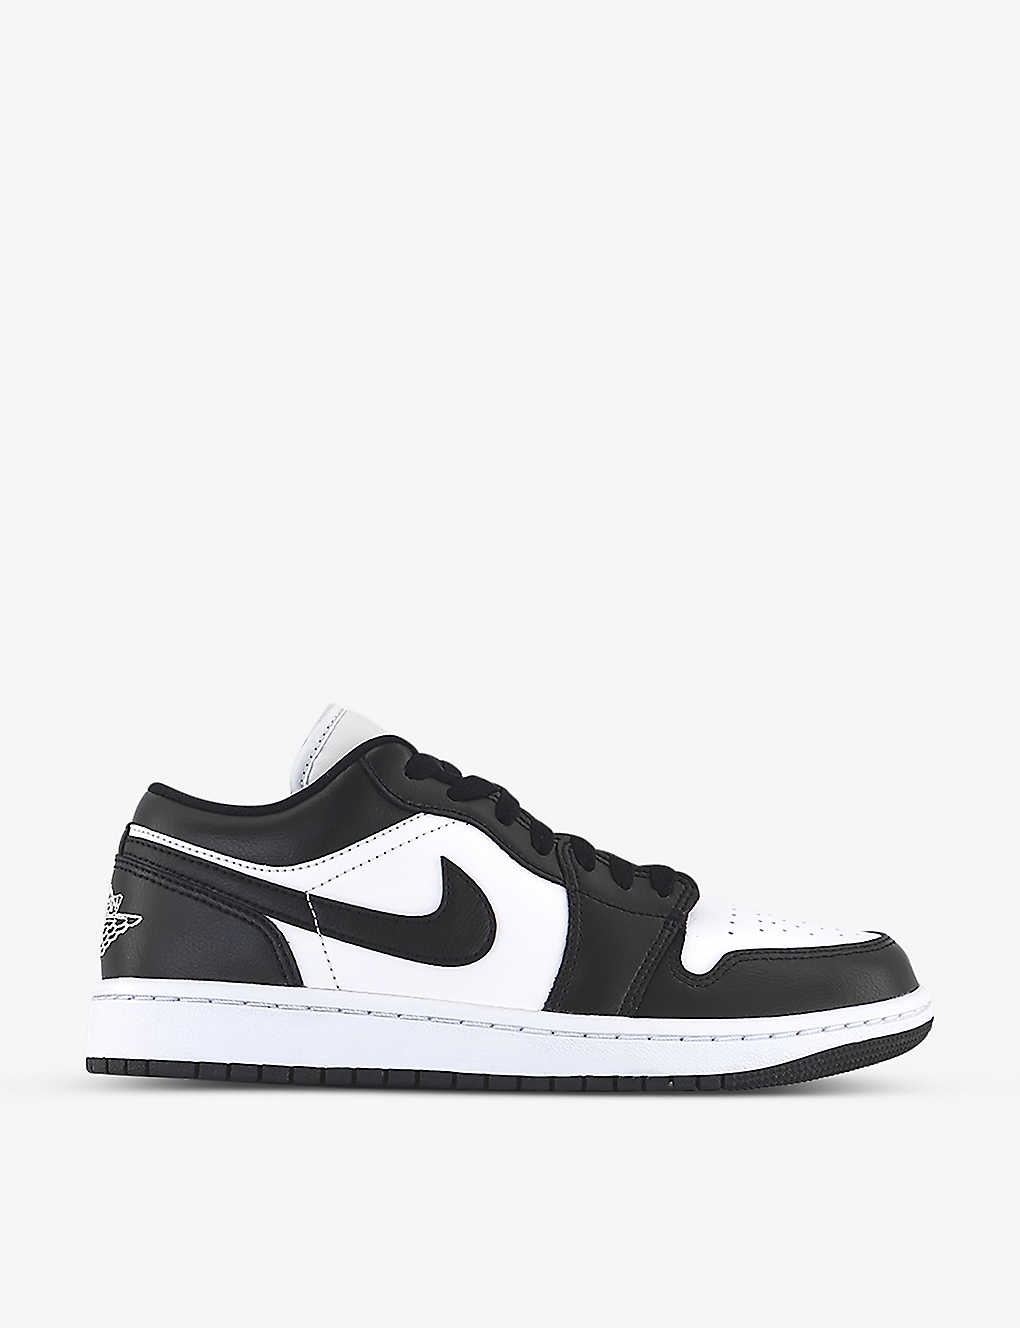 Air Jordan 1 Low chunky sole leather low-top trainers - 1